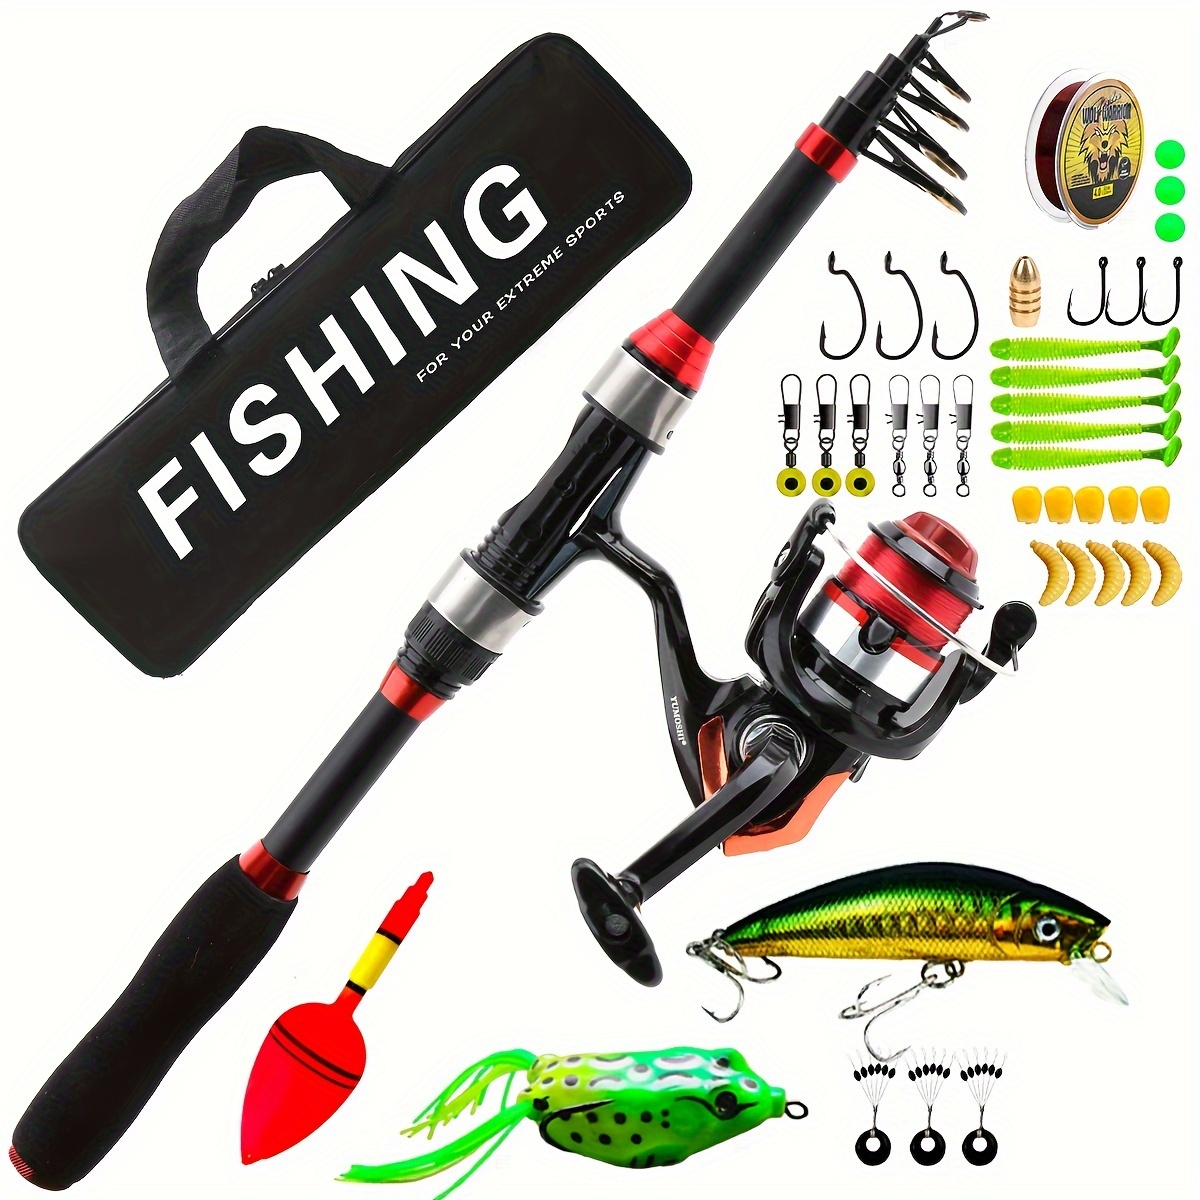 70.87inch Telescopic Fishing Rod And Reel Combo, Portable Ultralight Rod  With 4.8:1 Gear Ratio Fishing Reel, Lures, Hooks And Line For Beginners